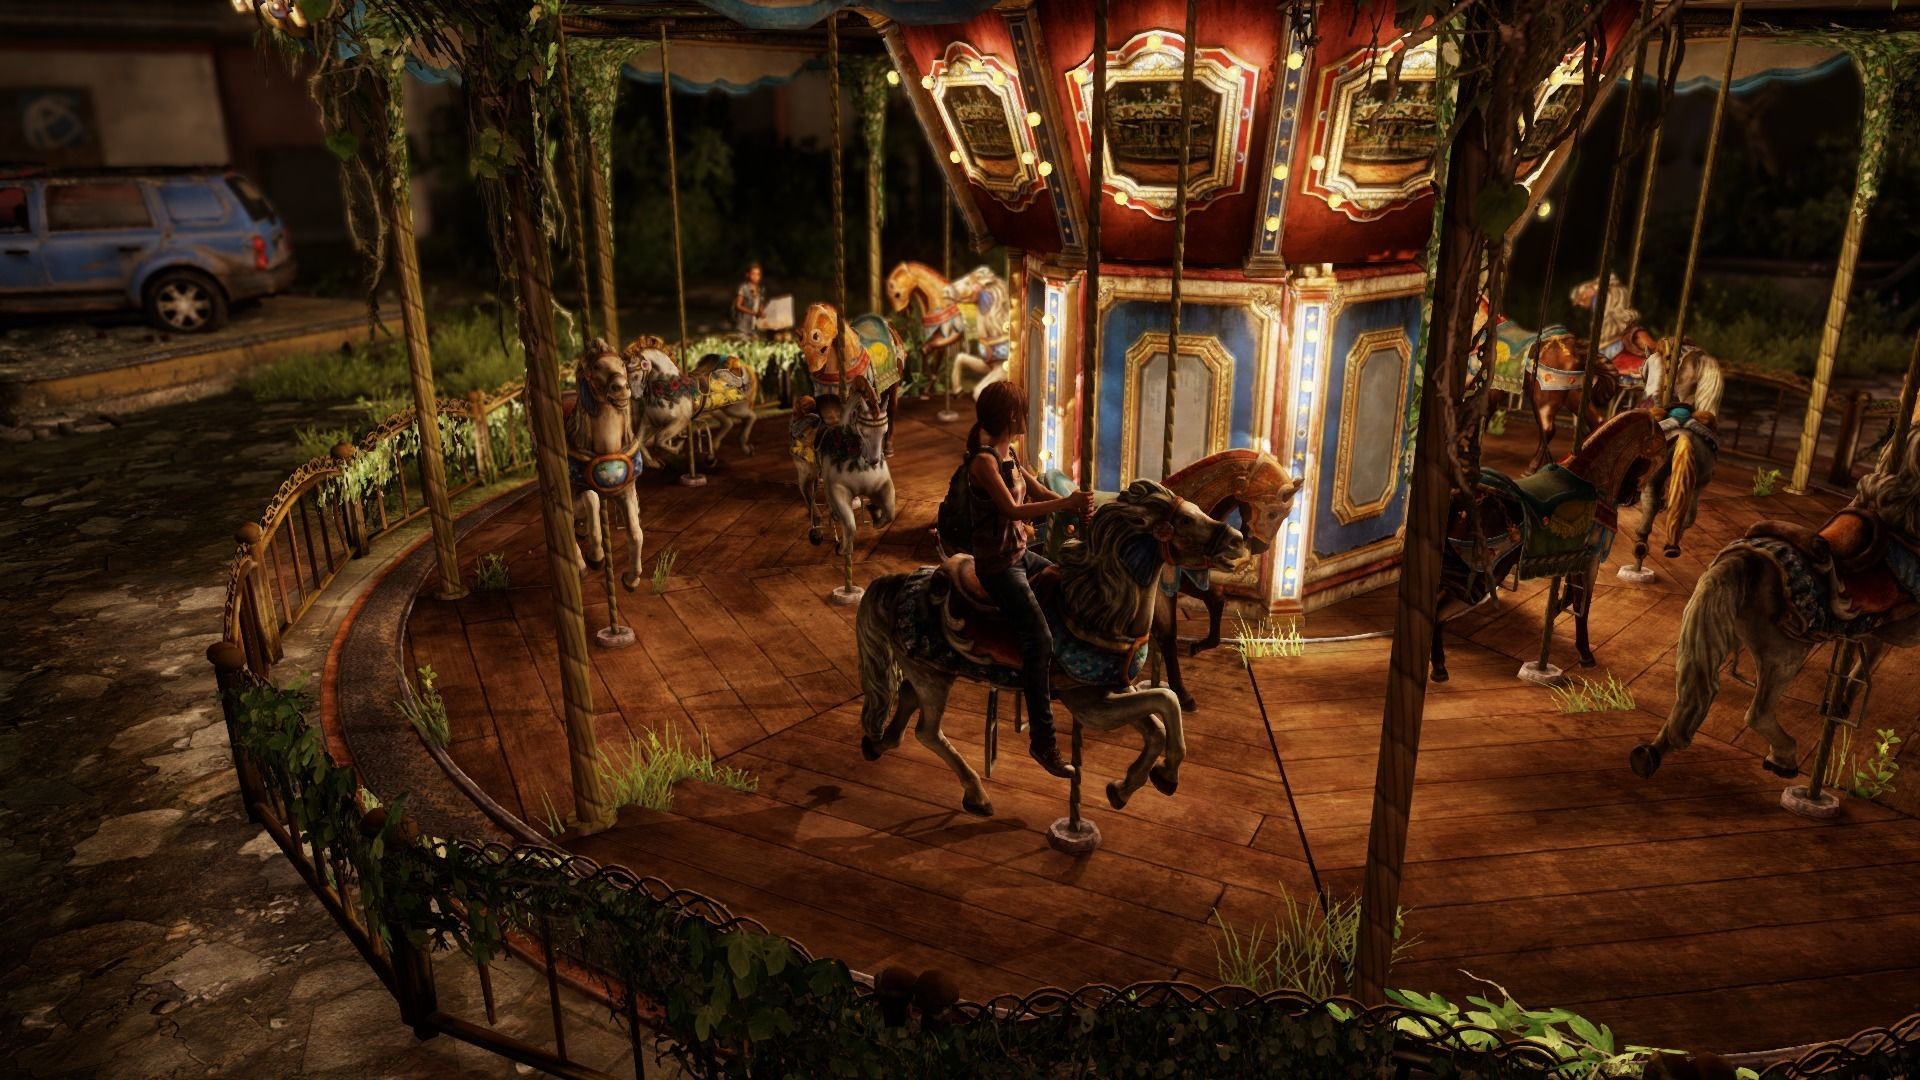 1920x1080 Taking a ride on the merry-go-round.